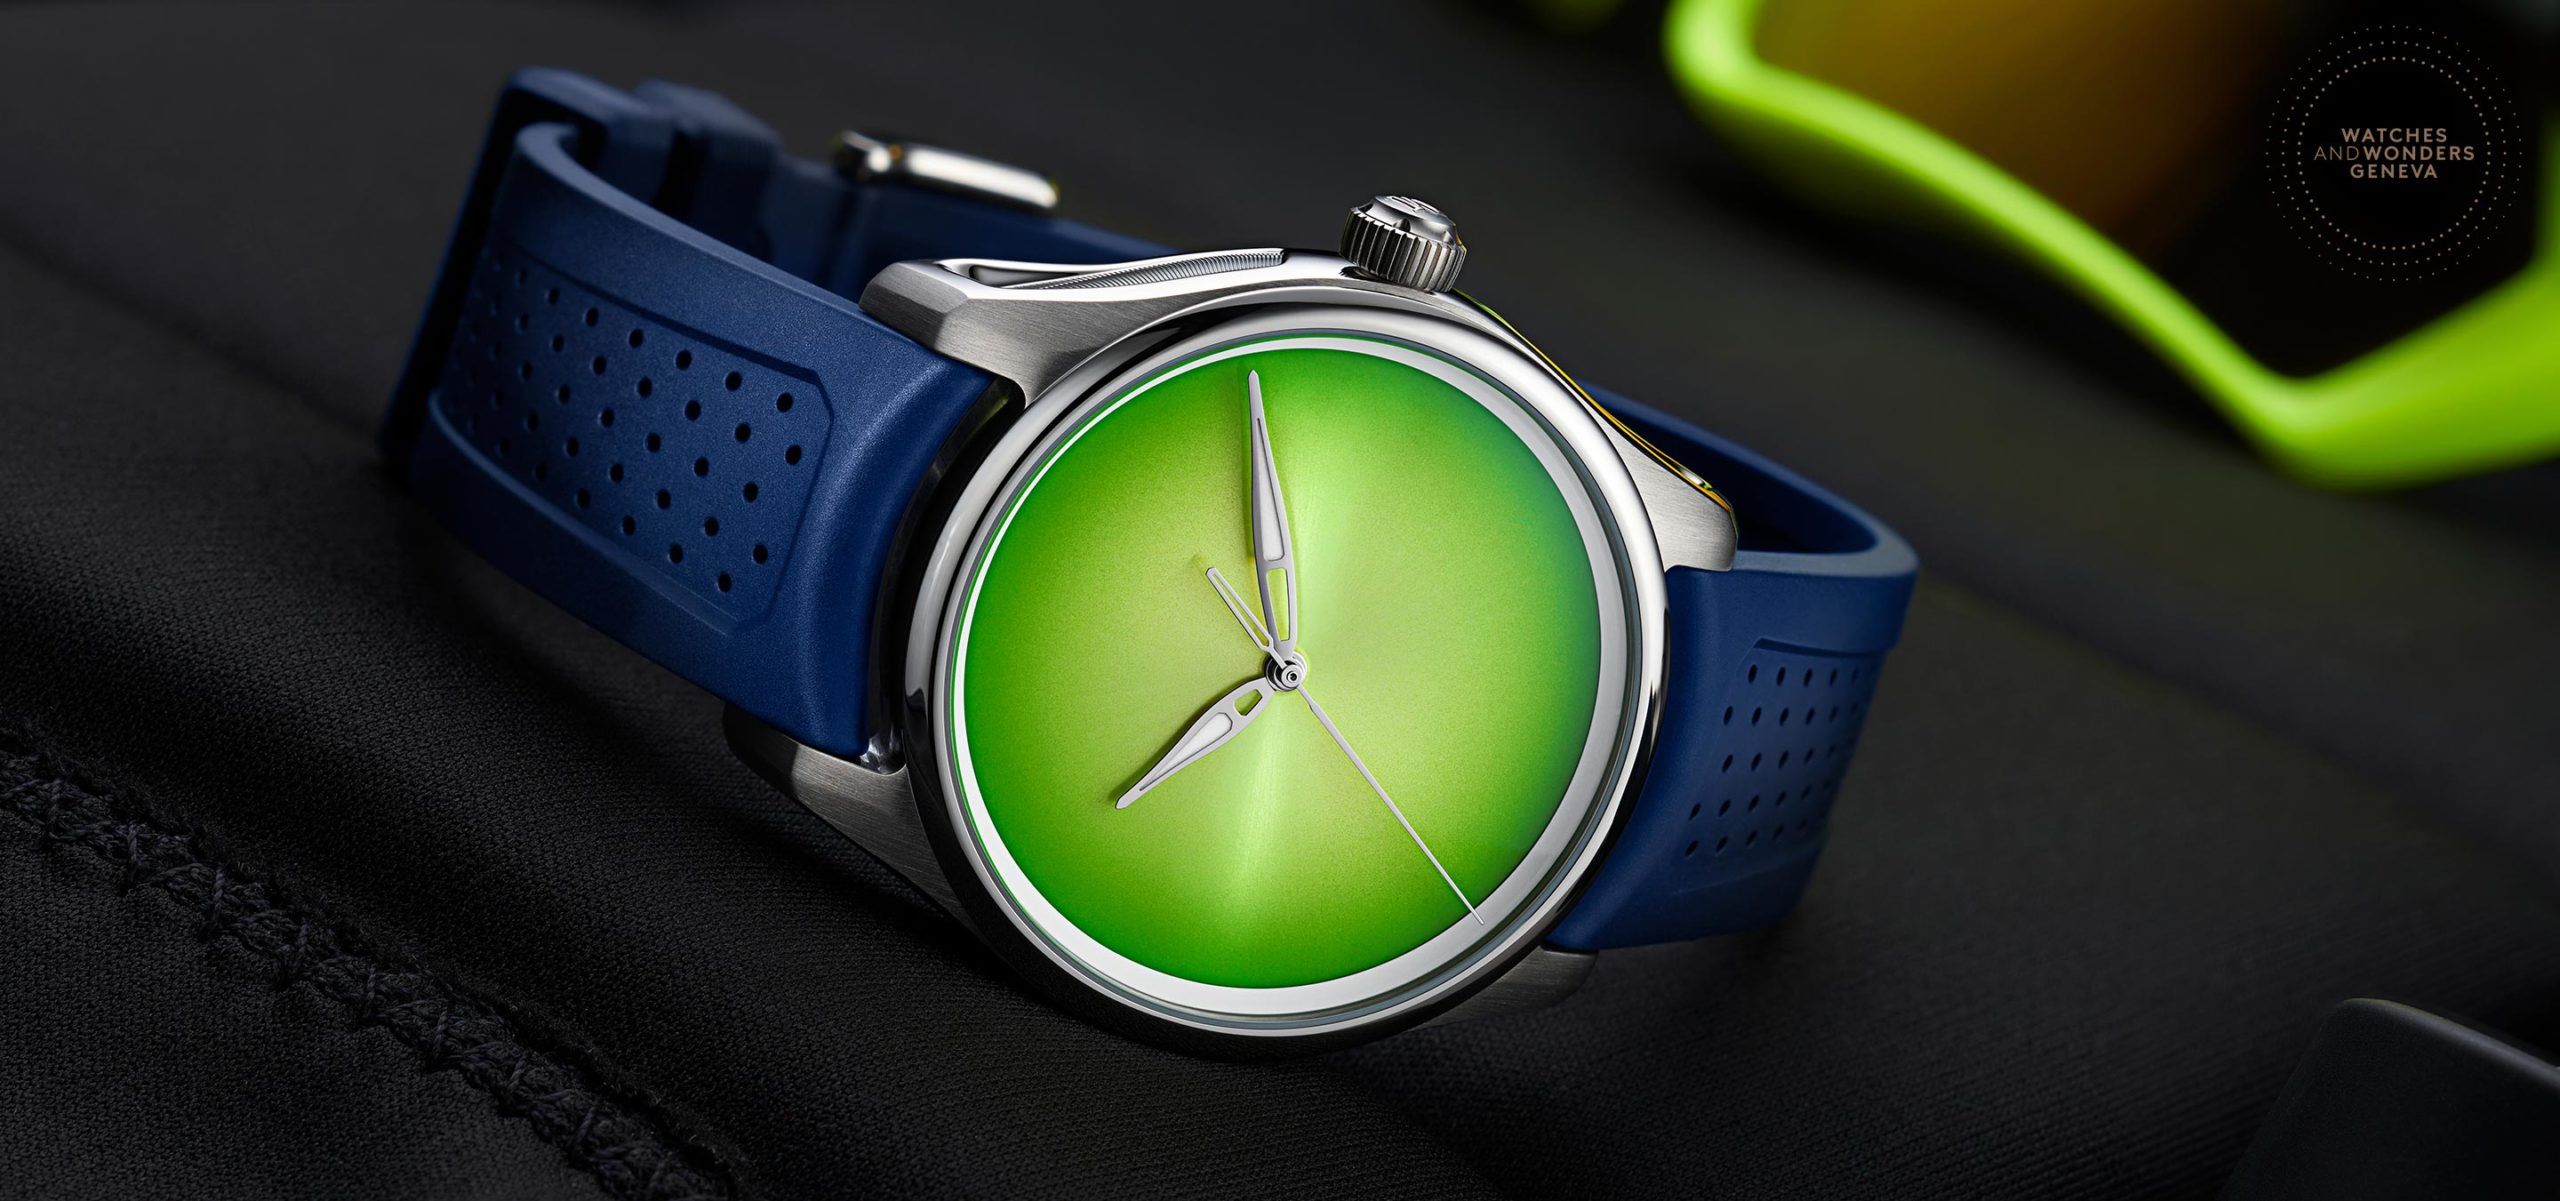 The Green Glow: Presenting The H. Moser & Cie. Pioneer Centre Seconds Concept Citrus Green Timepiece